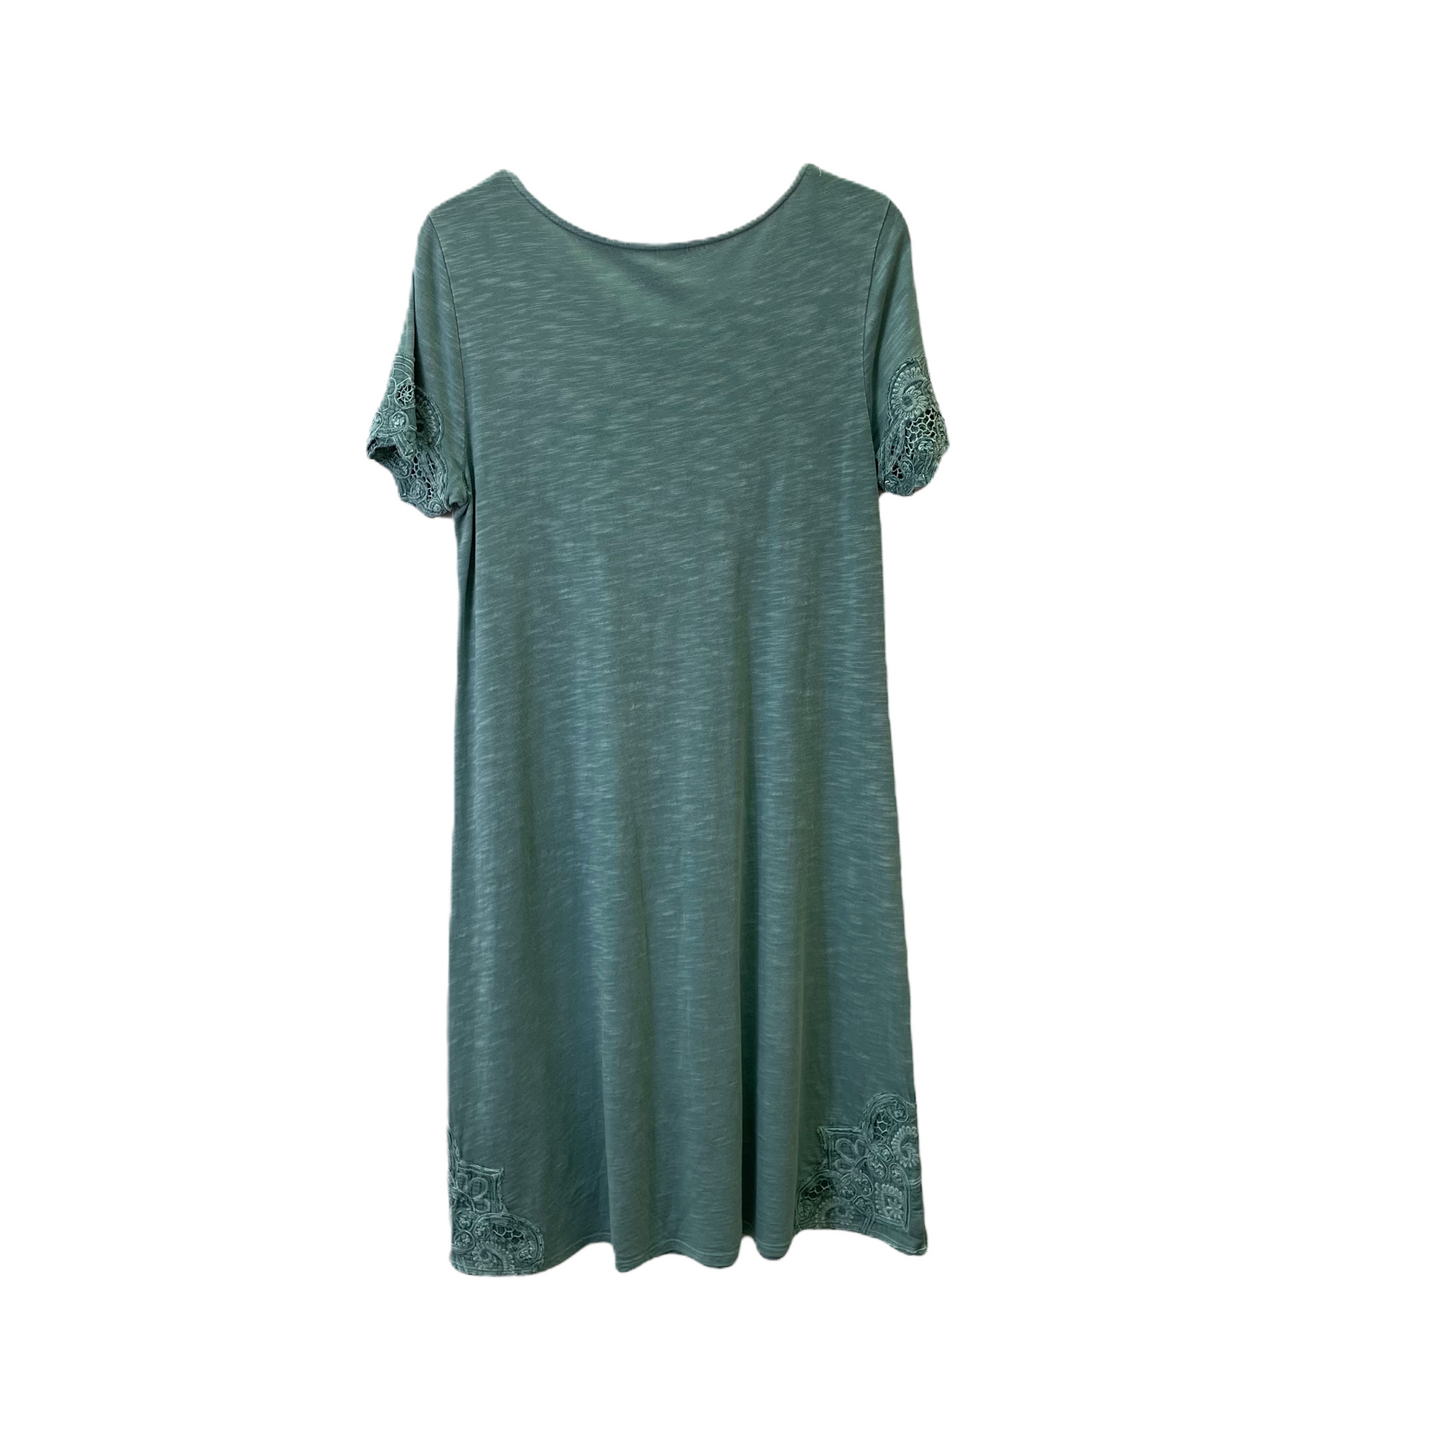 Mint Dress Casual Short By Soft Surroundings, Size: S